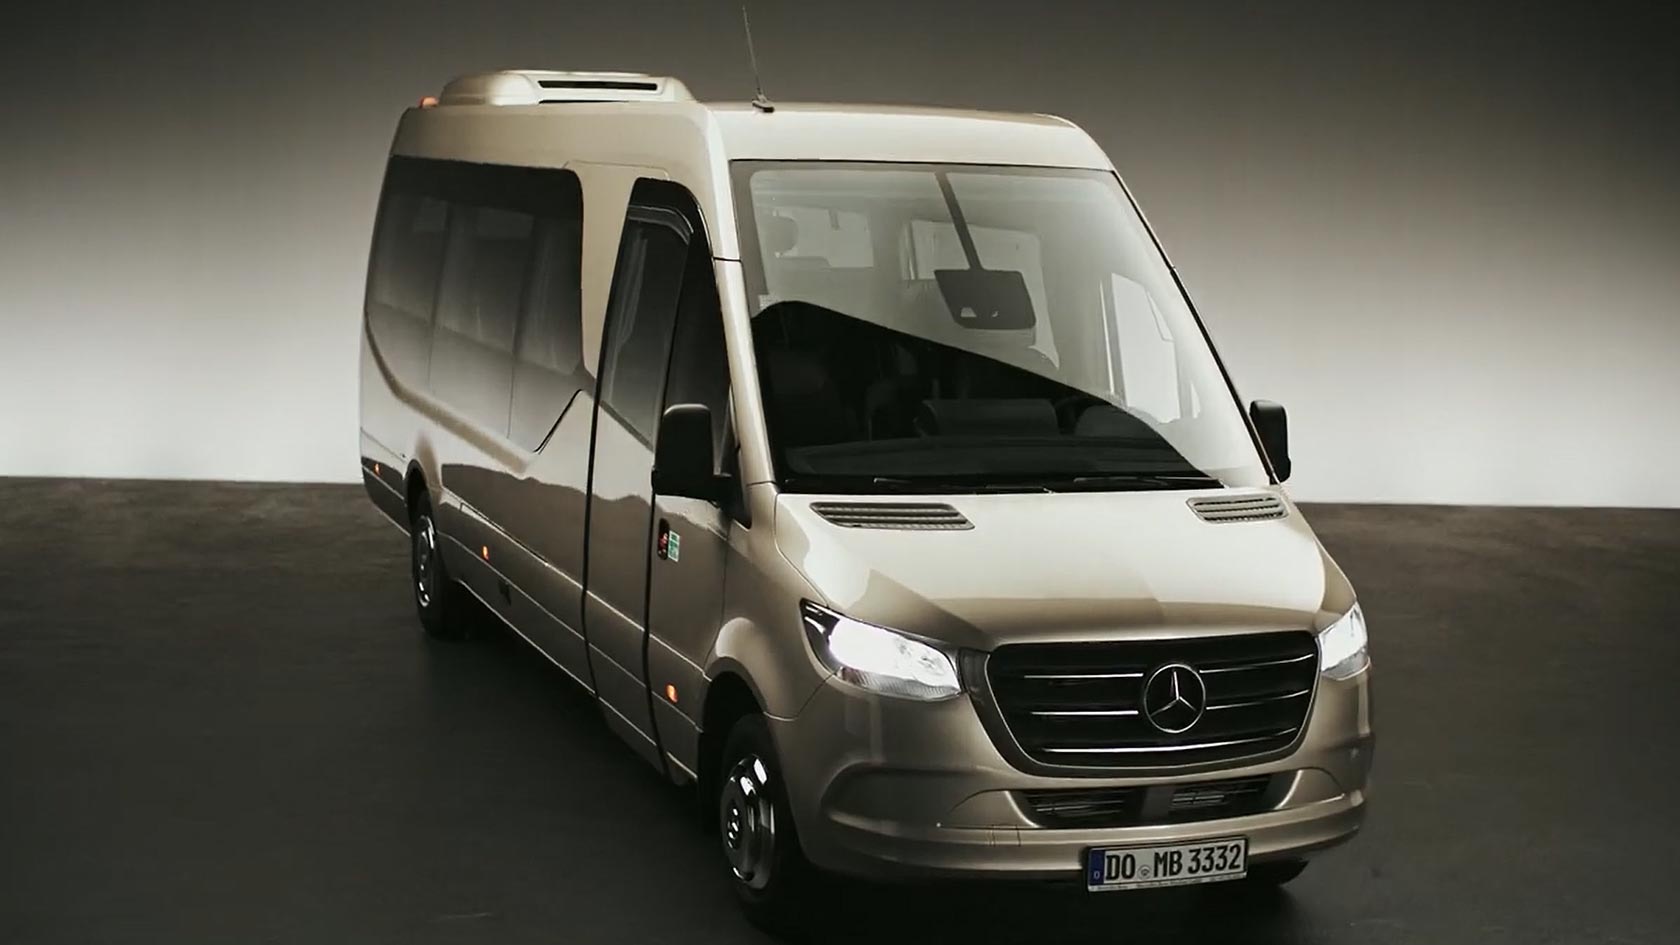 How to Choose the Right Minibus Hire for Your UK Group Travels